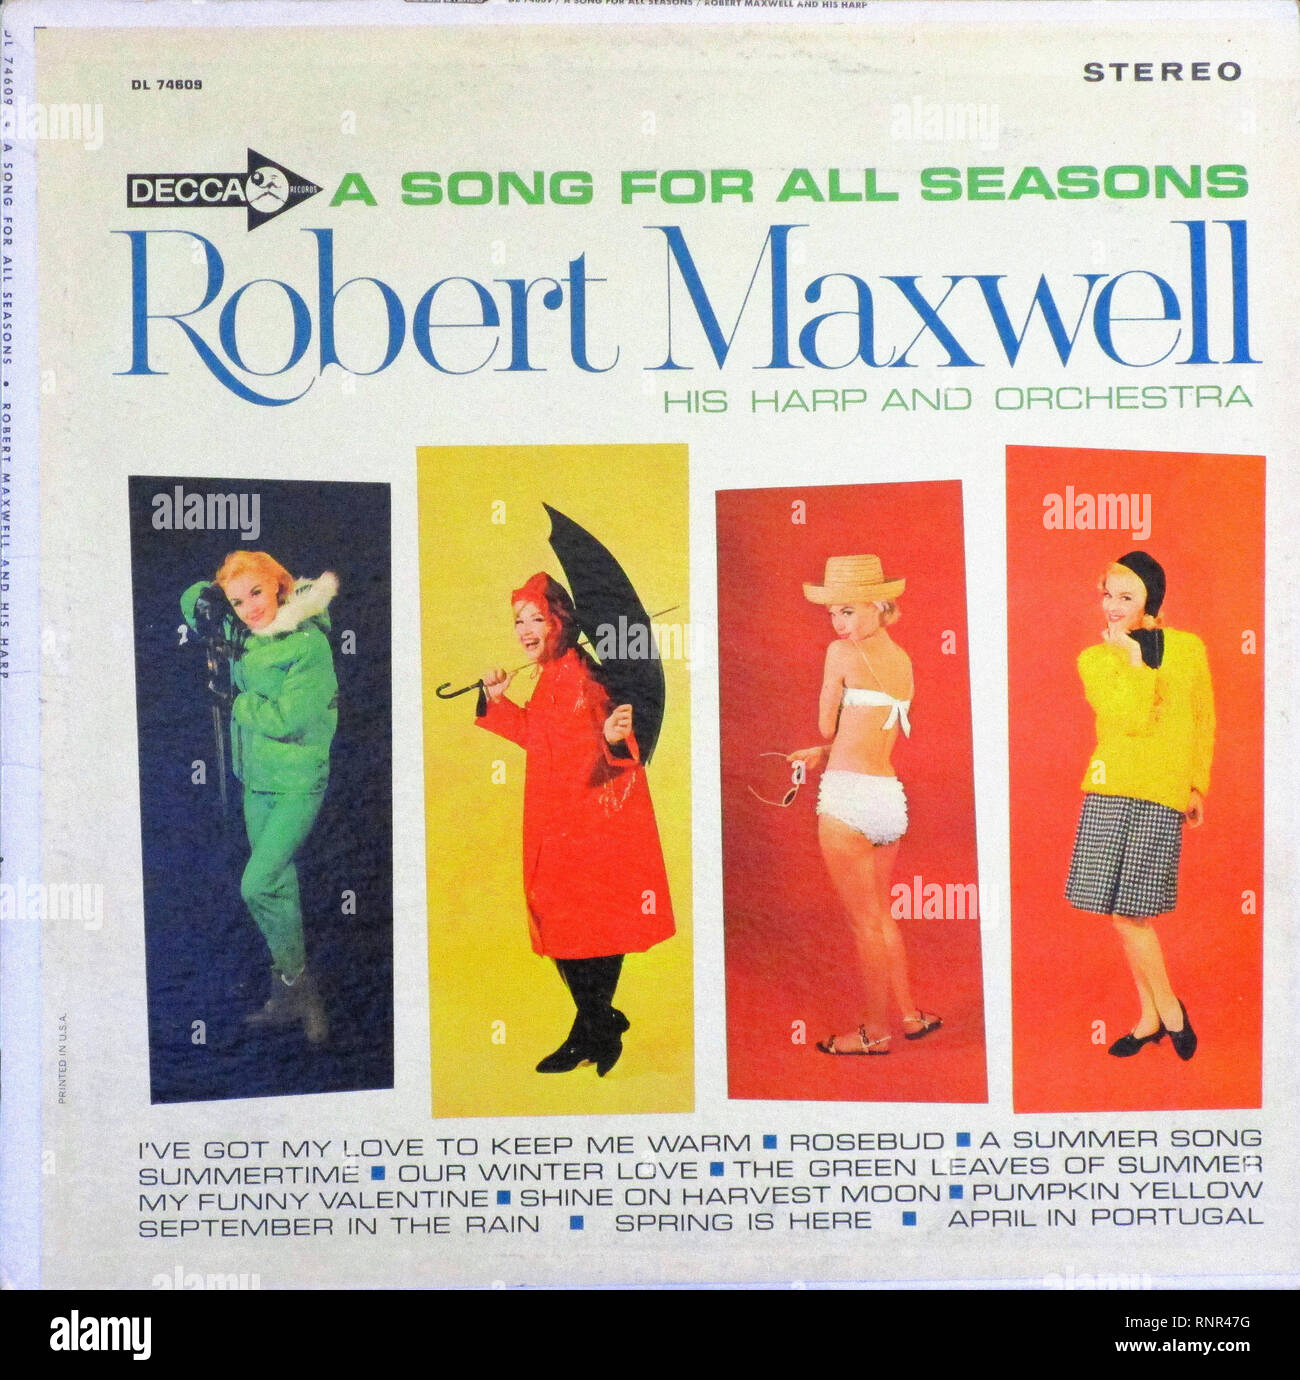 Vintage Vinyl Lp Cover A Song For All Seasons Robert Maxwell 1965 Stock Photo